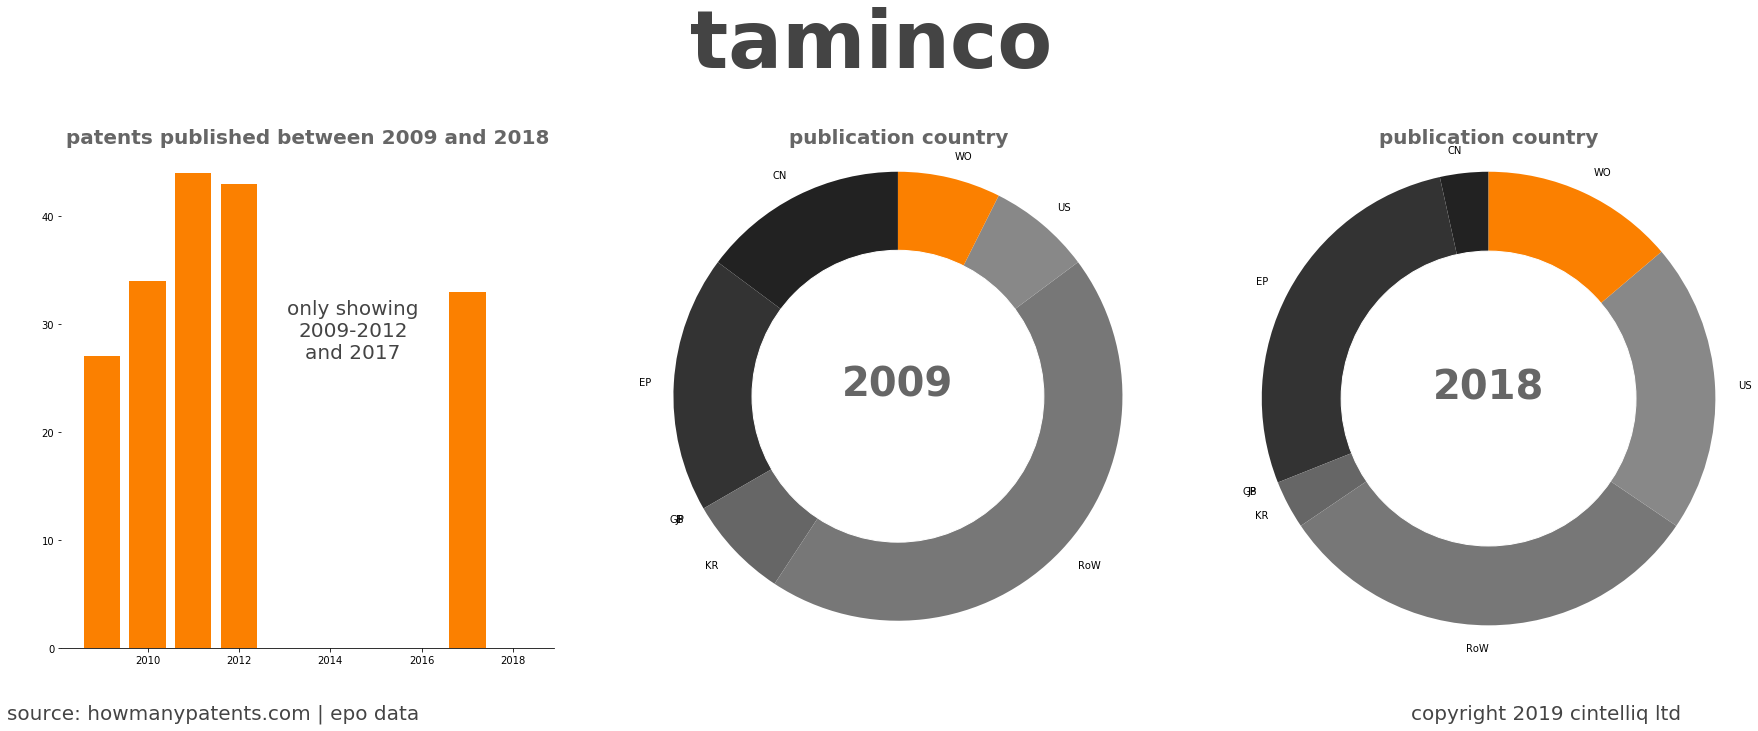 summary of patents for Taminco